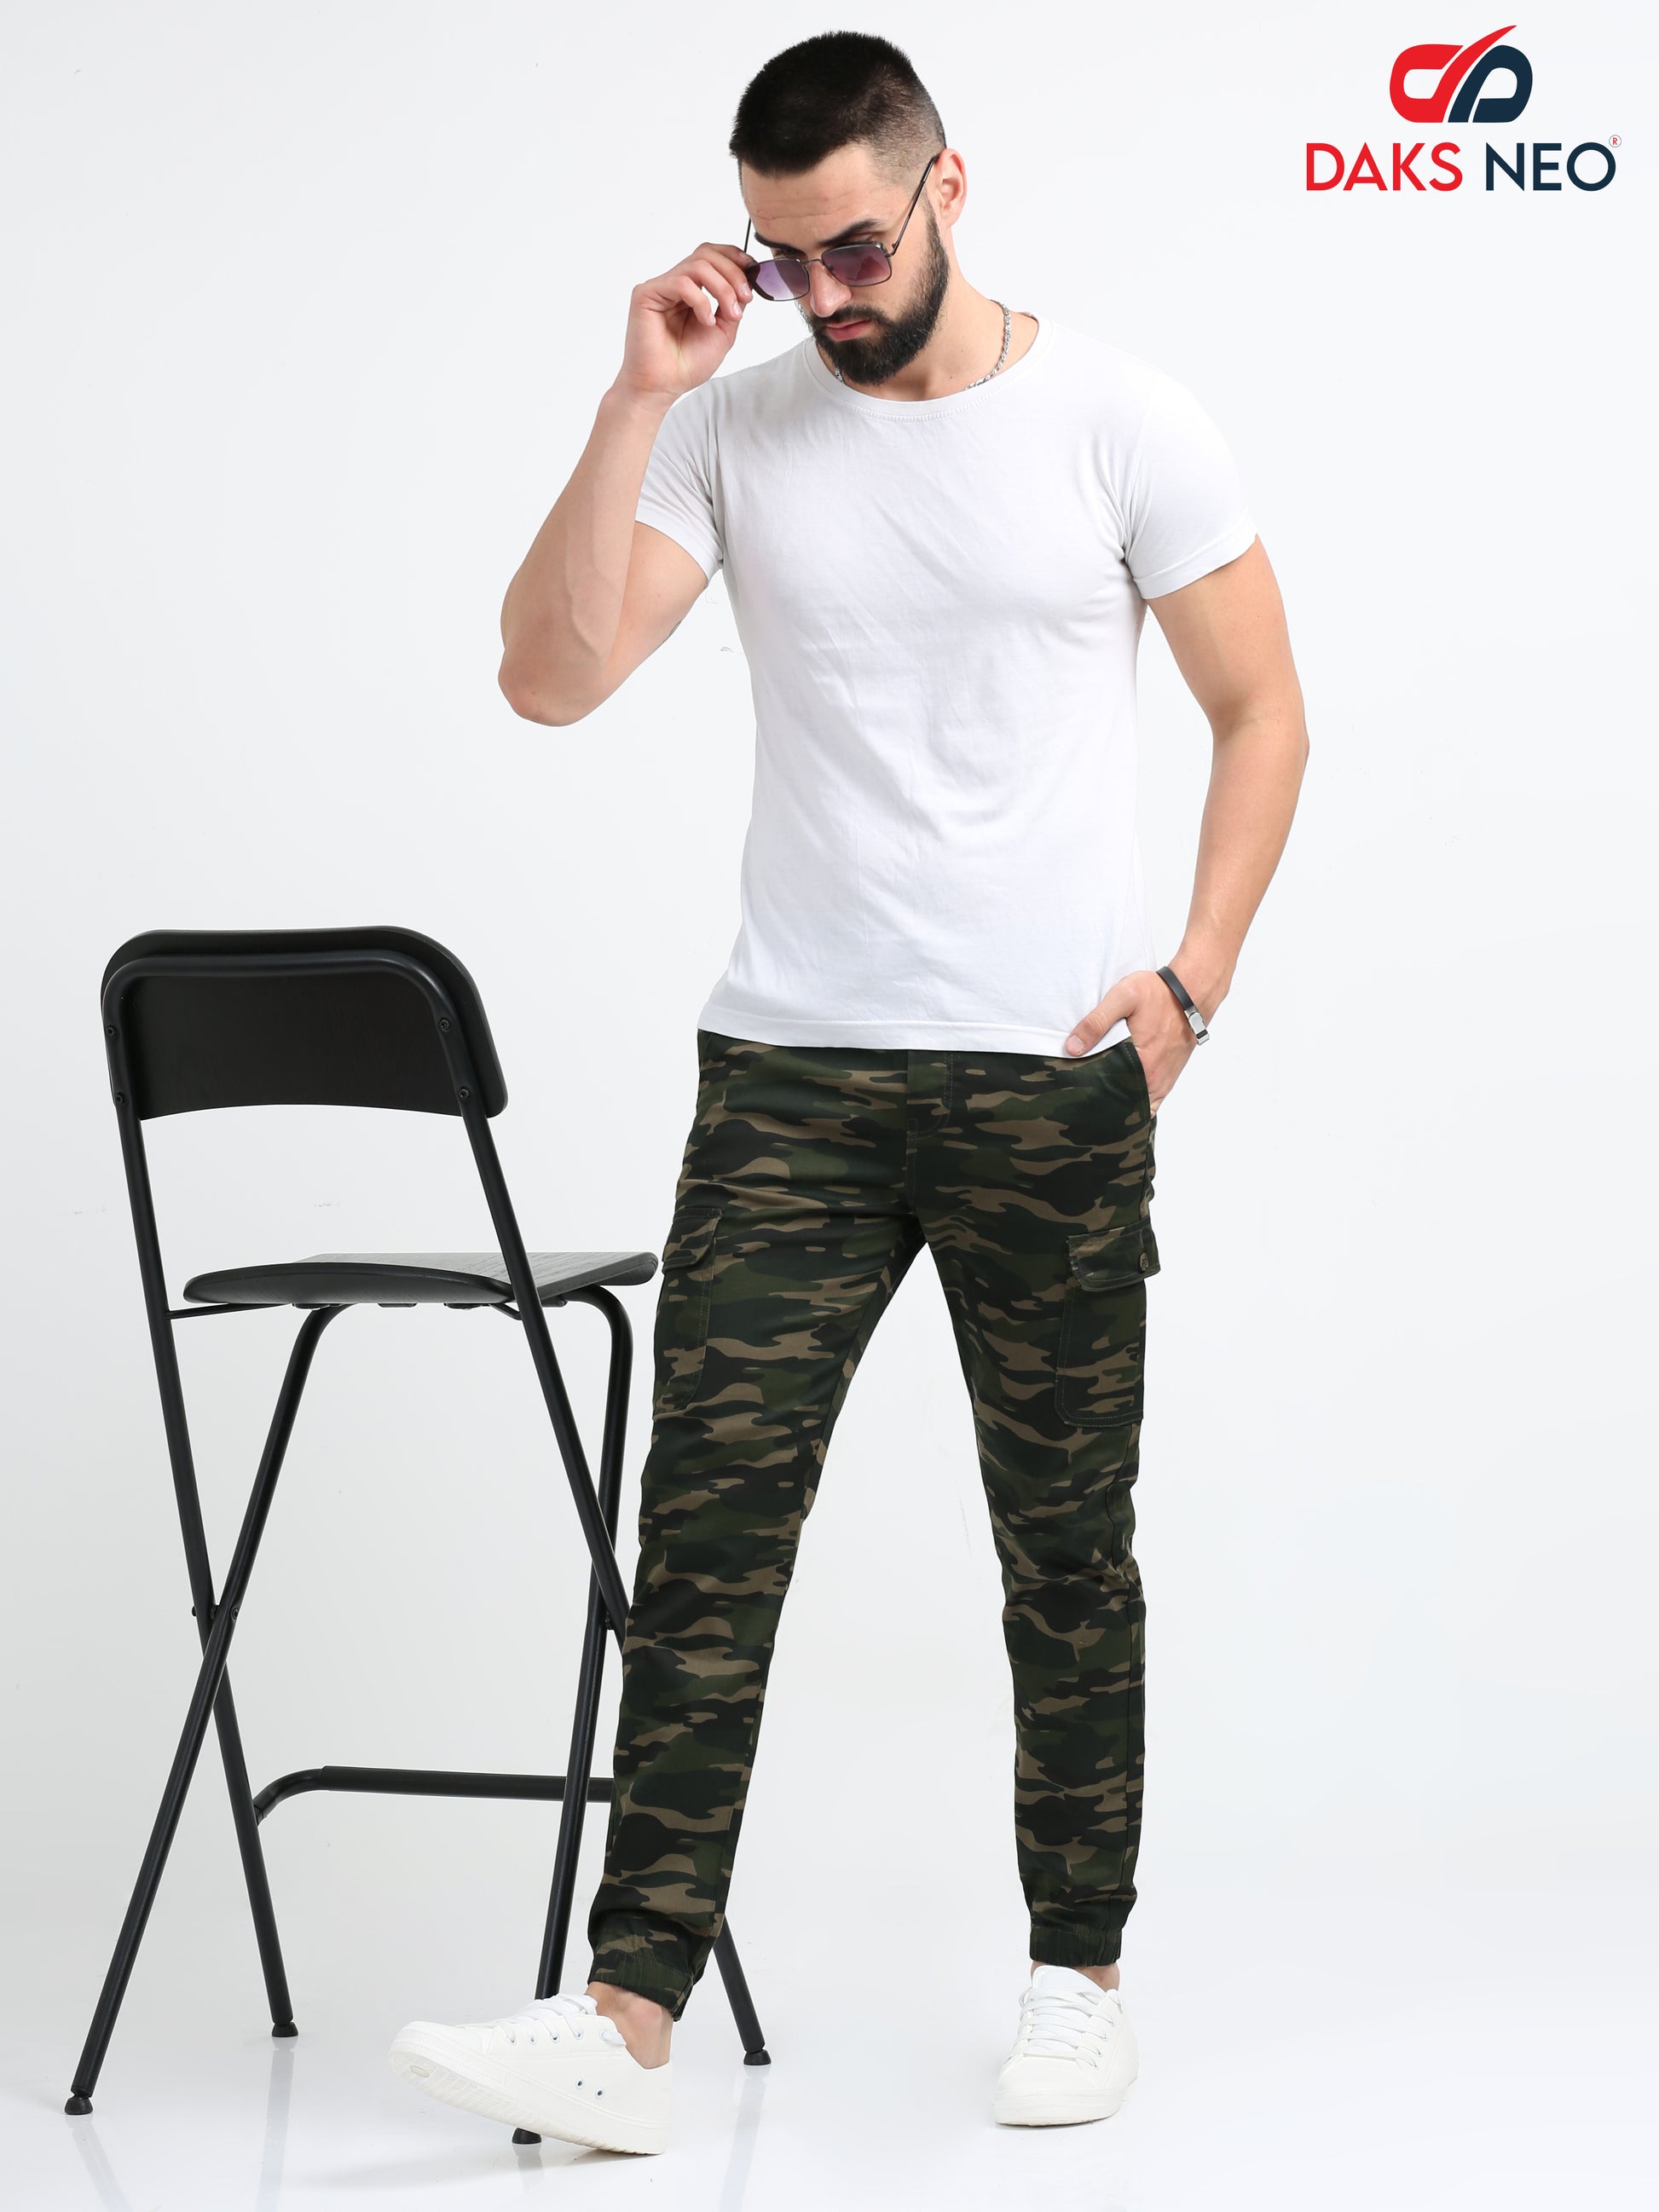 Black Camouflage Joggers for Men 